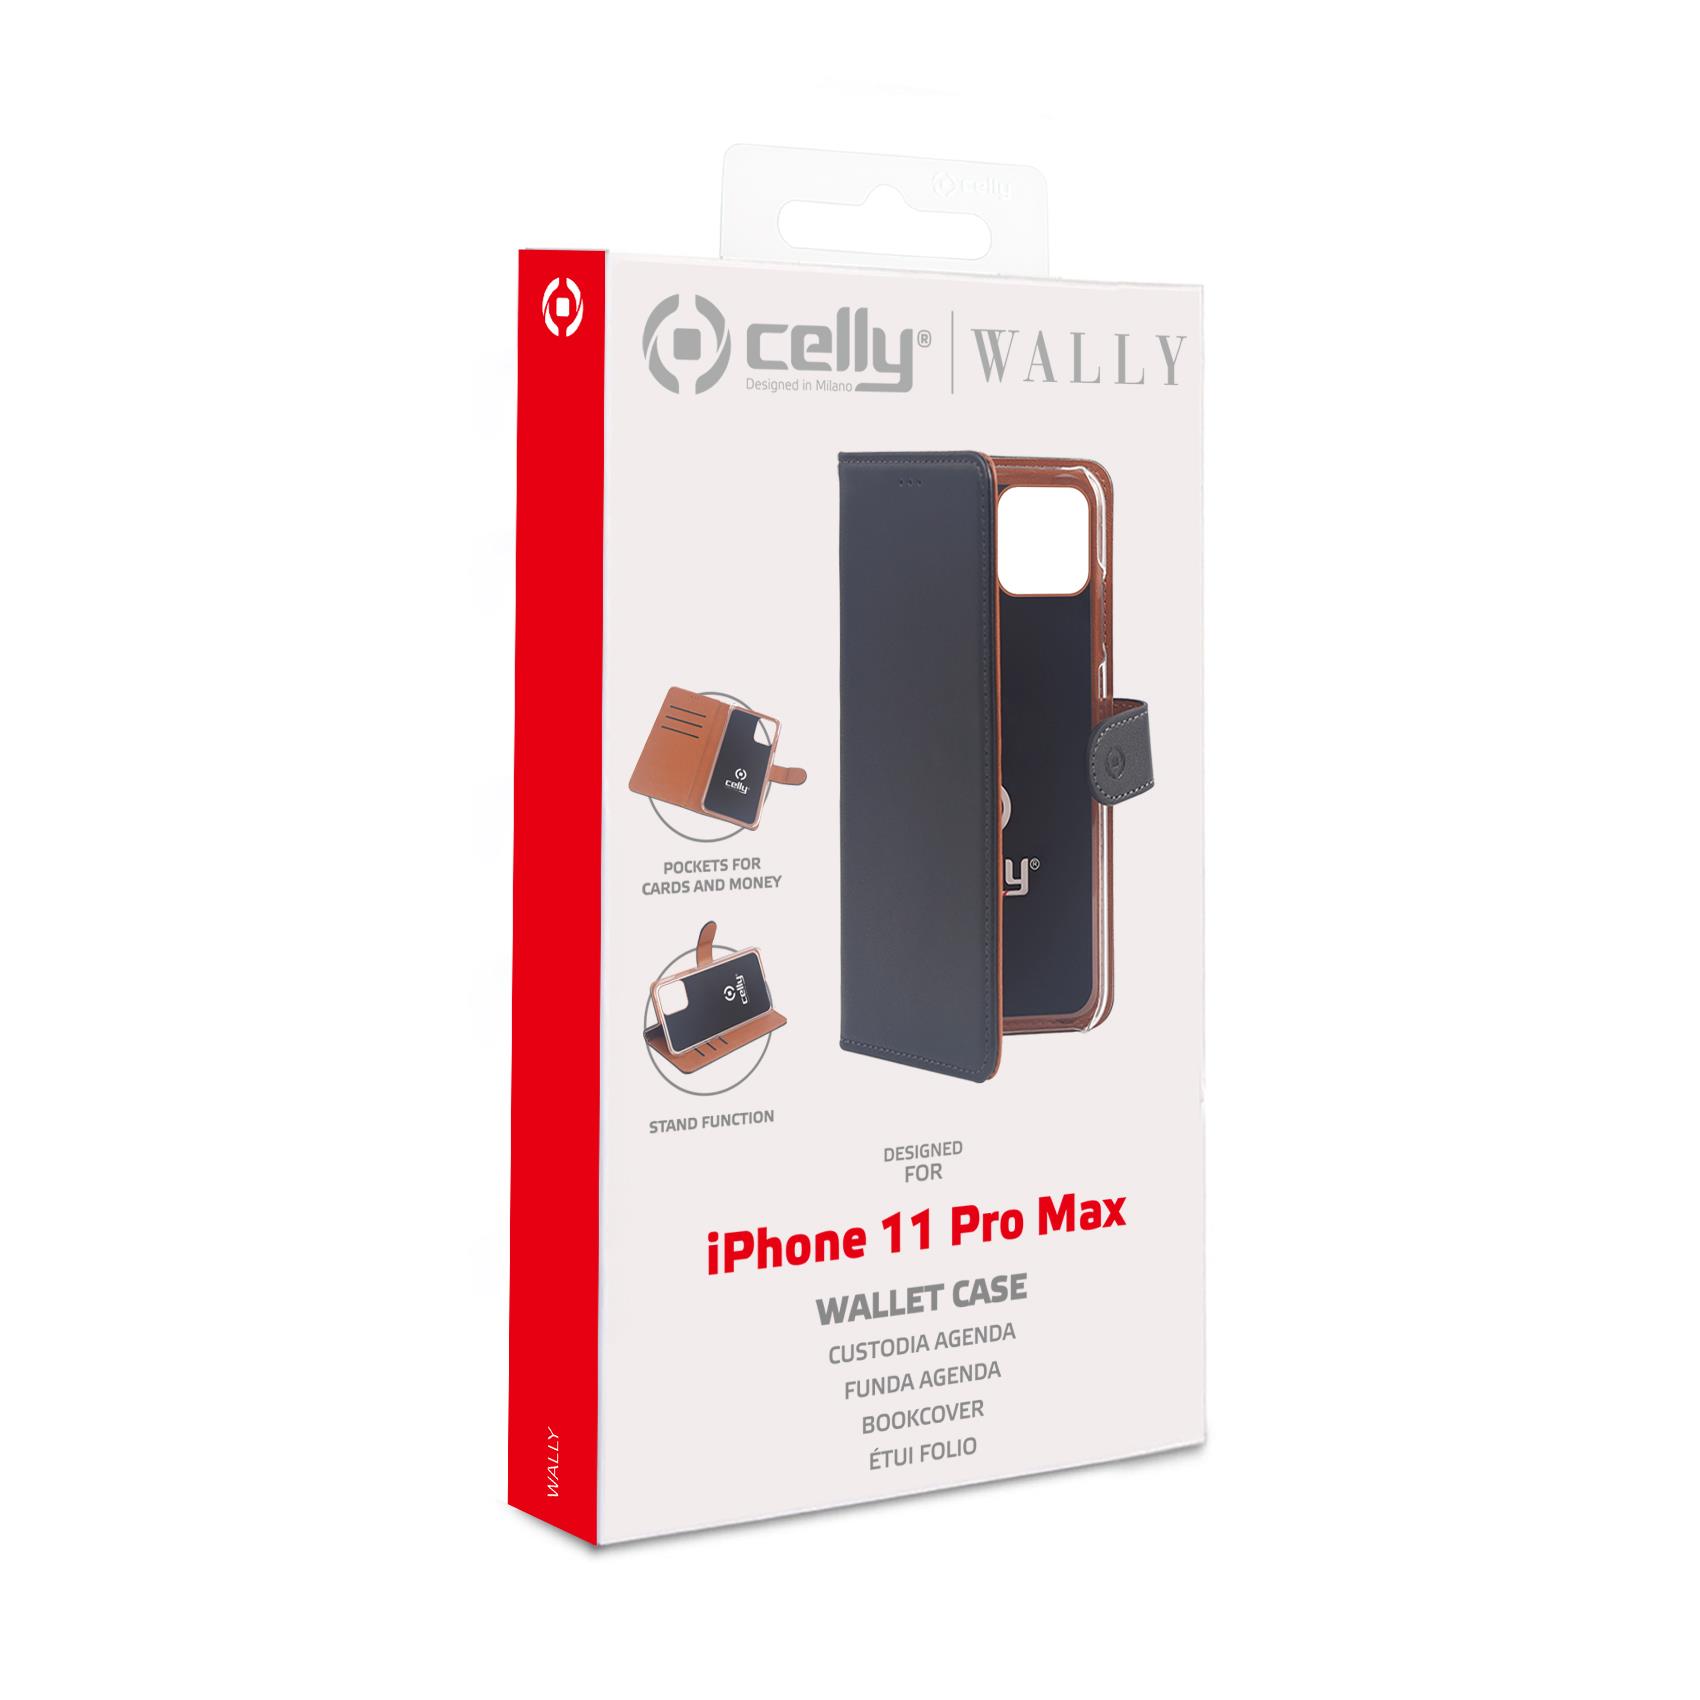 Wally Case Iphone 11 Pro Max Black Celly Wally1002 8021735752509